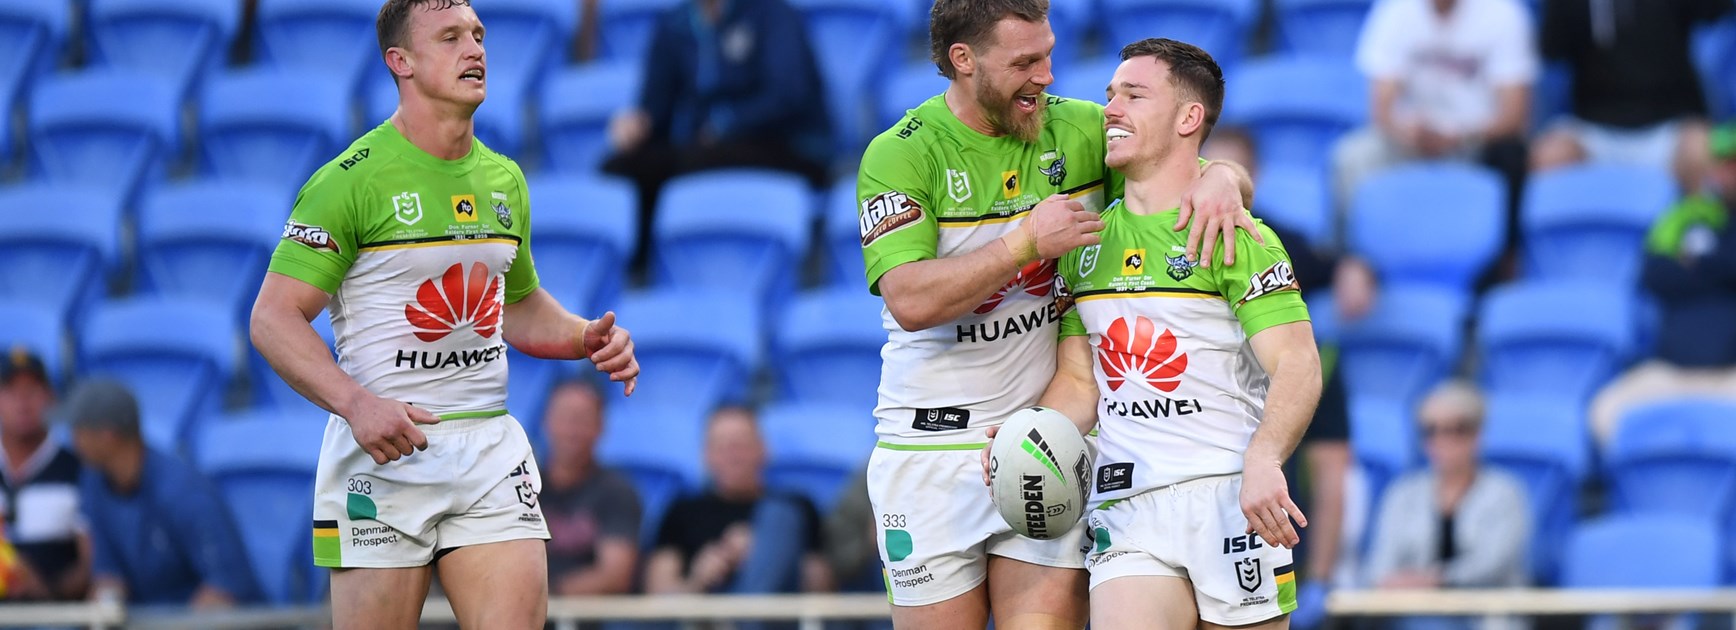 Livewire Starling set to stay in lime green after Raiders table offer